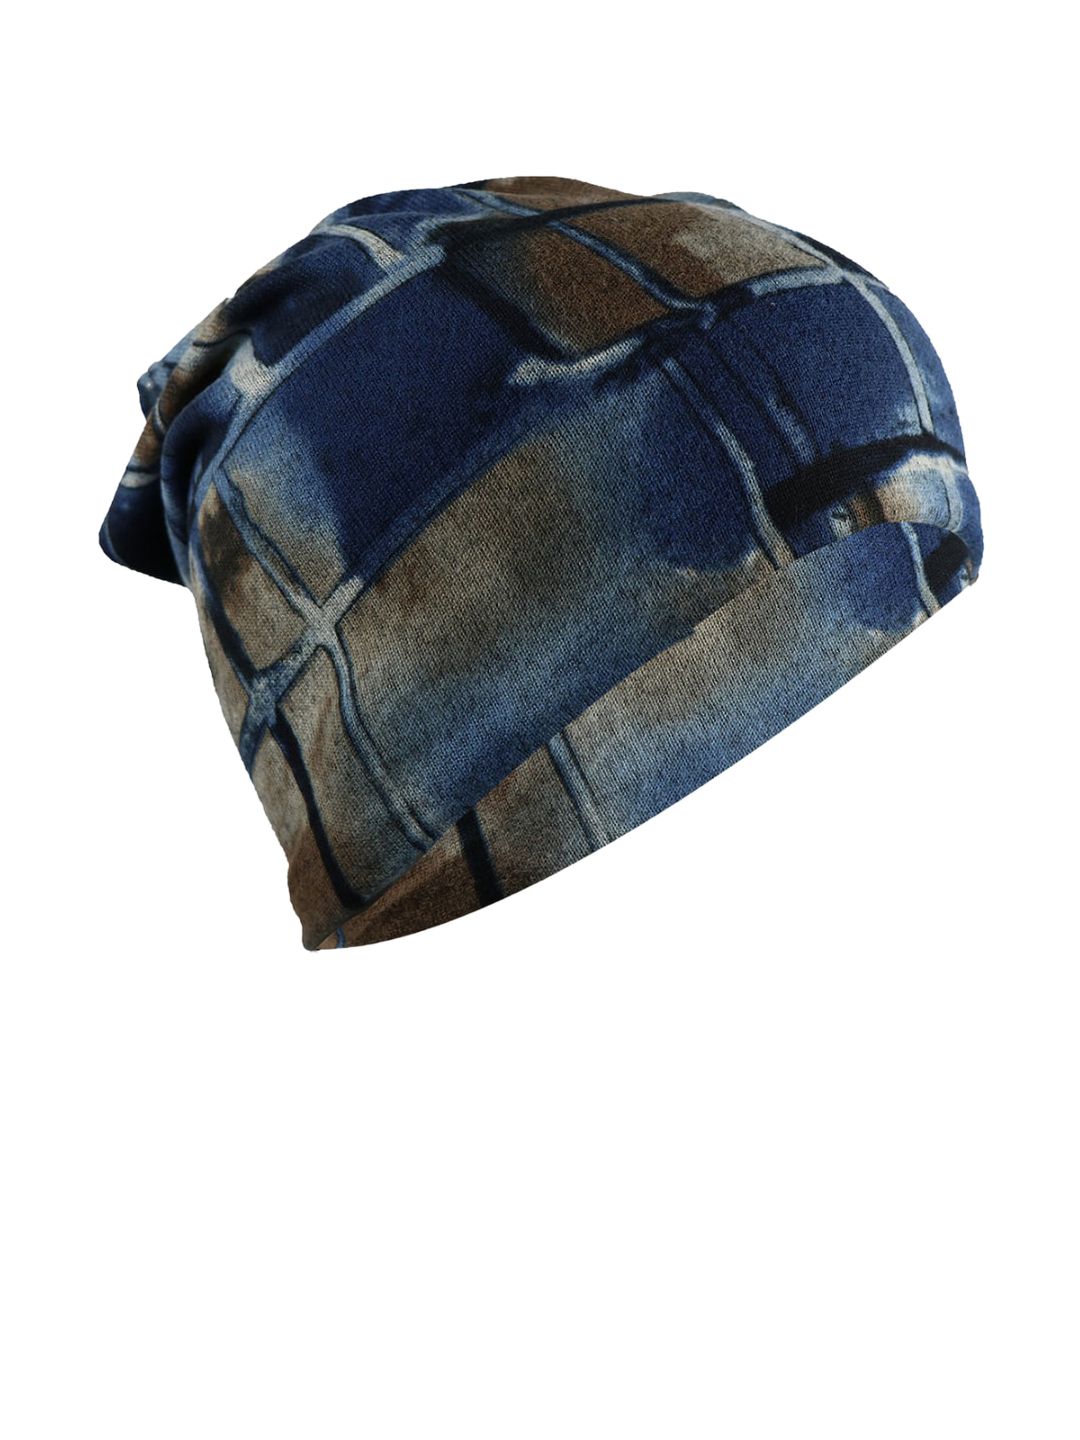 iSWEVEN Unisex Blue & Brown Printed Beanie Price in India